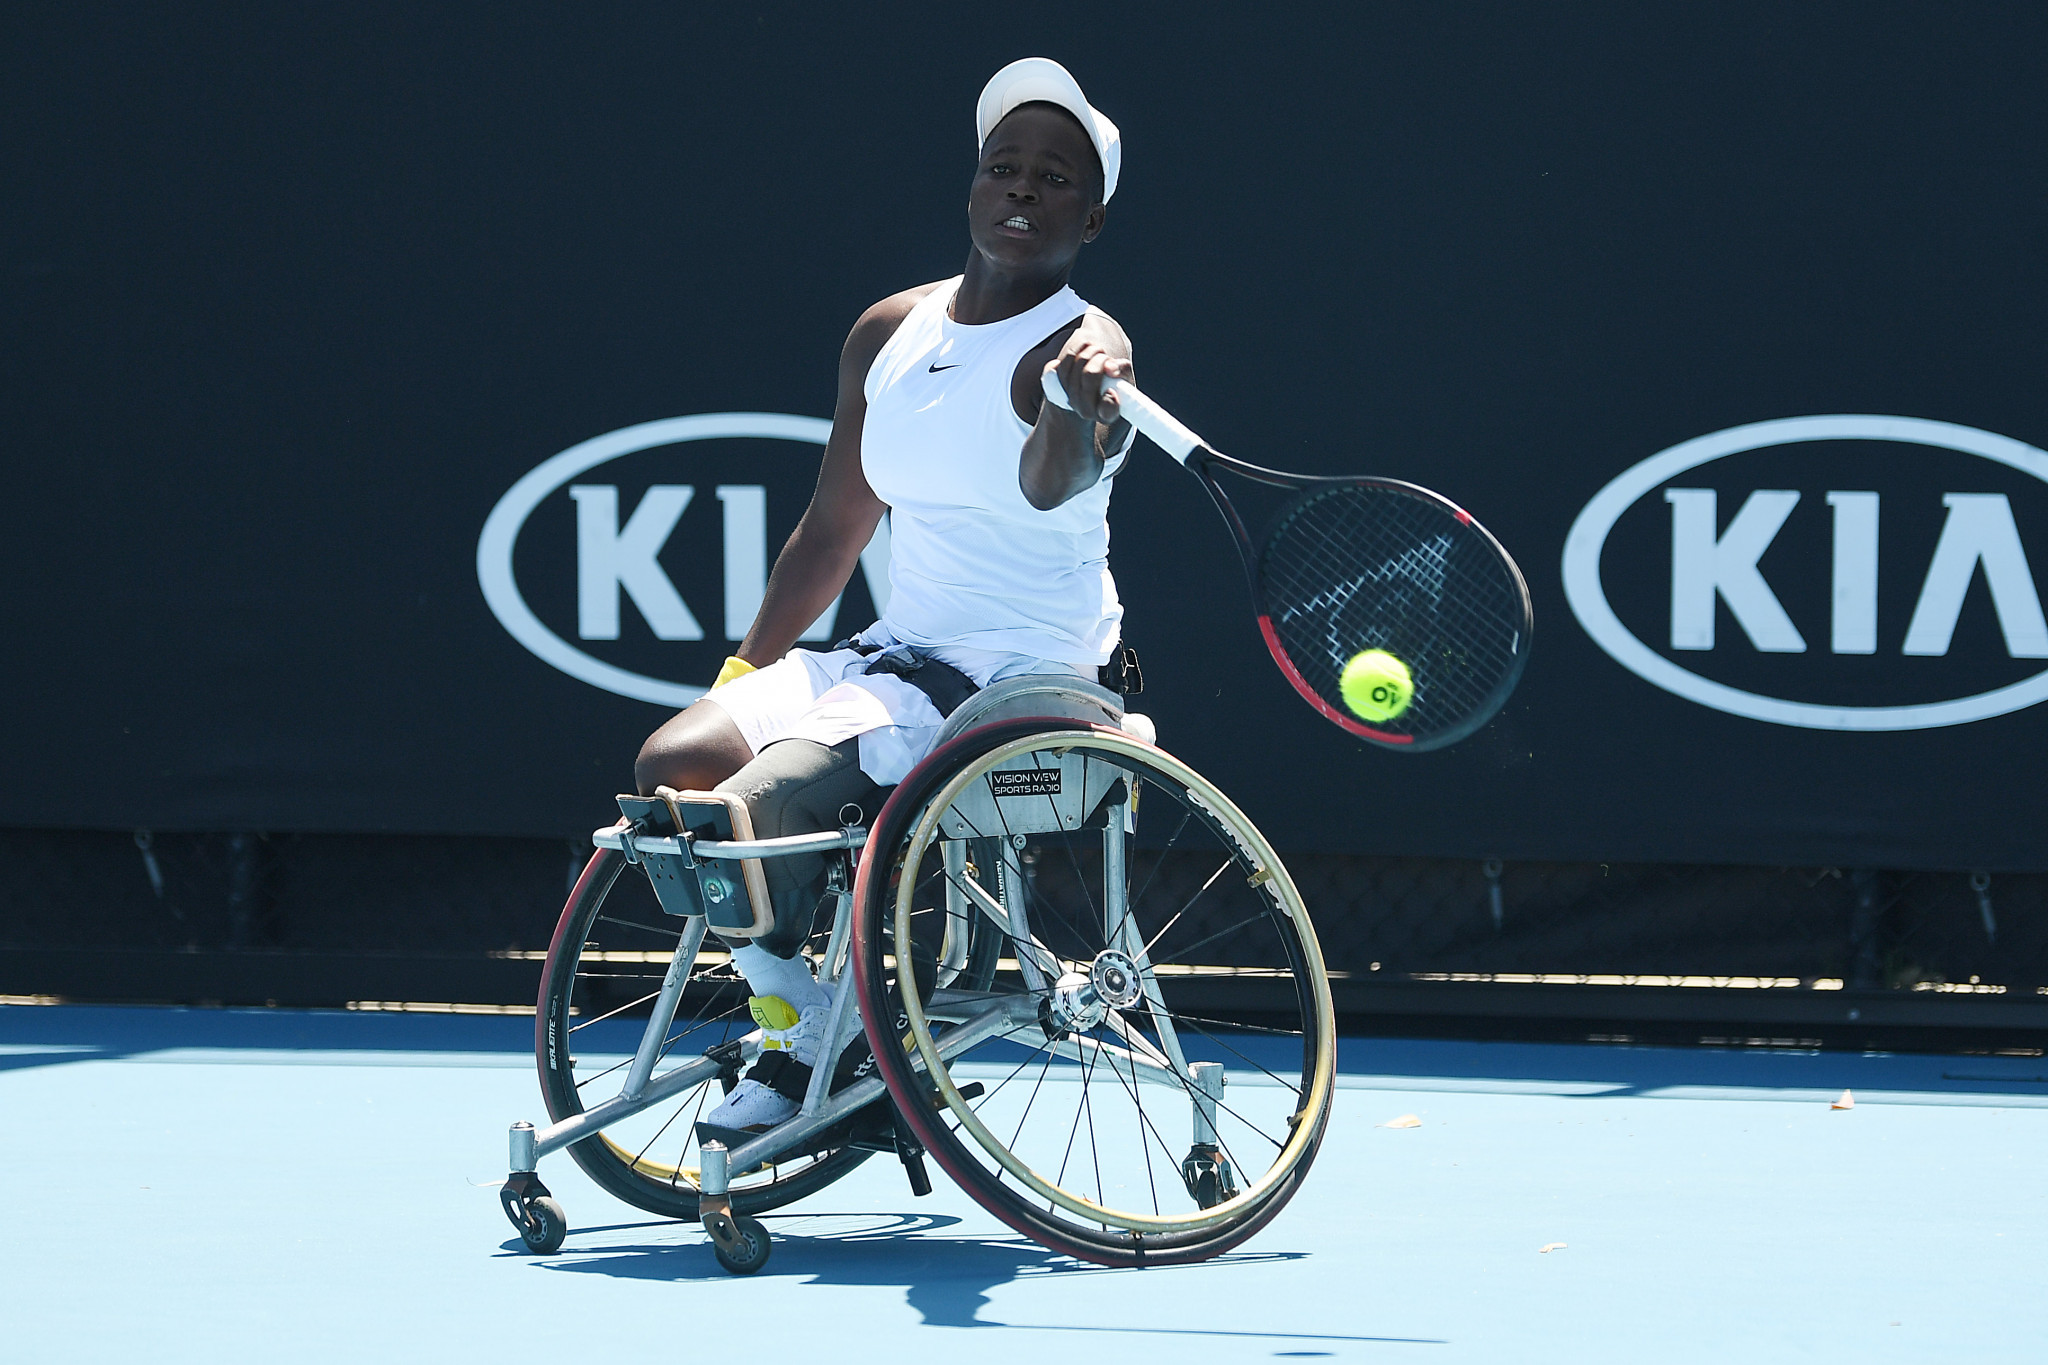 Kgothatso Montjane exited last year's Australian Open at the semi-final stage ©Getty Images